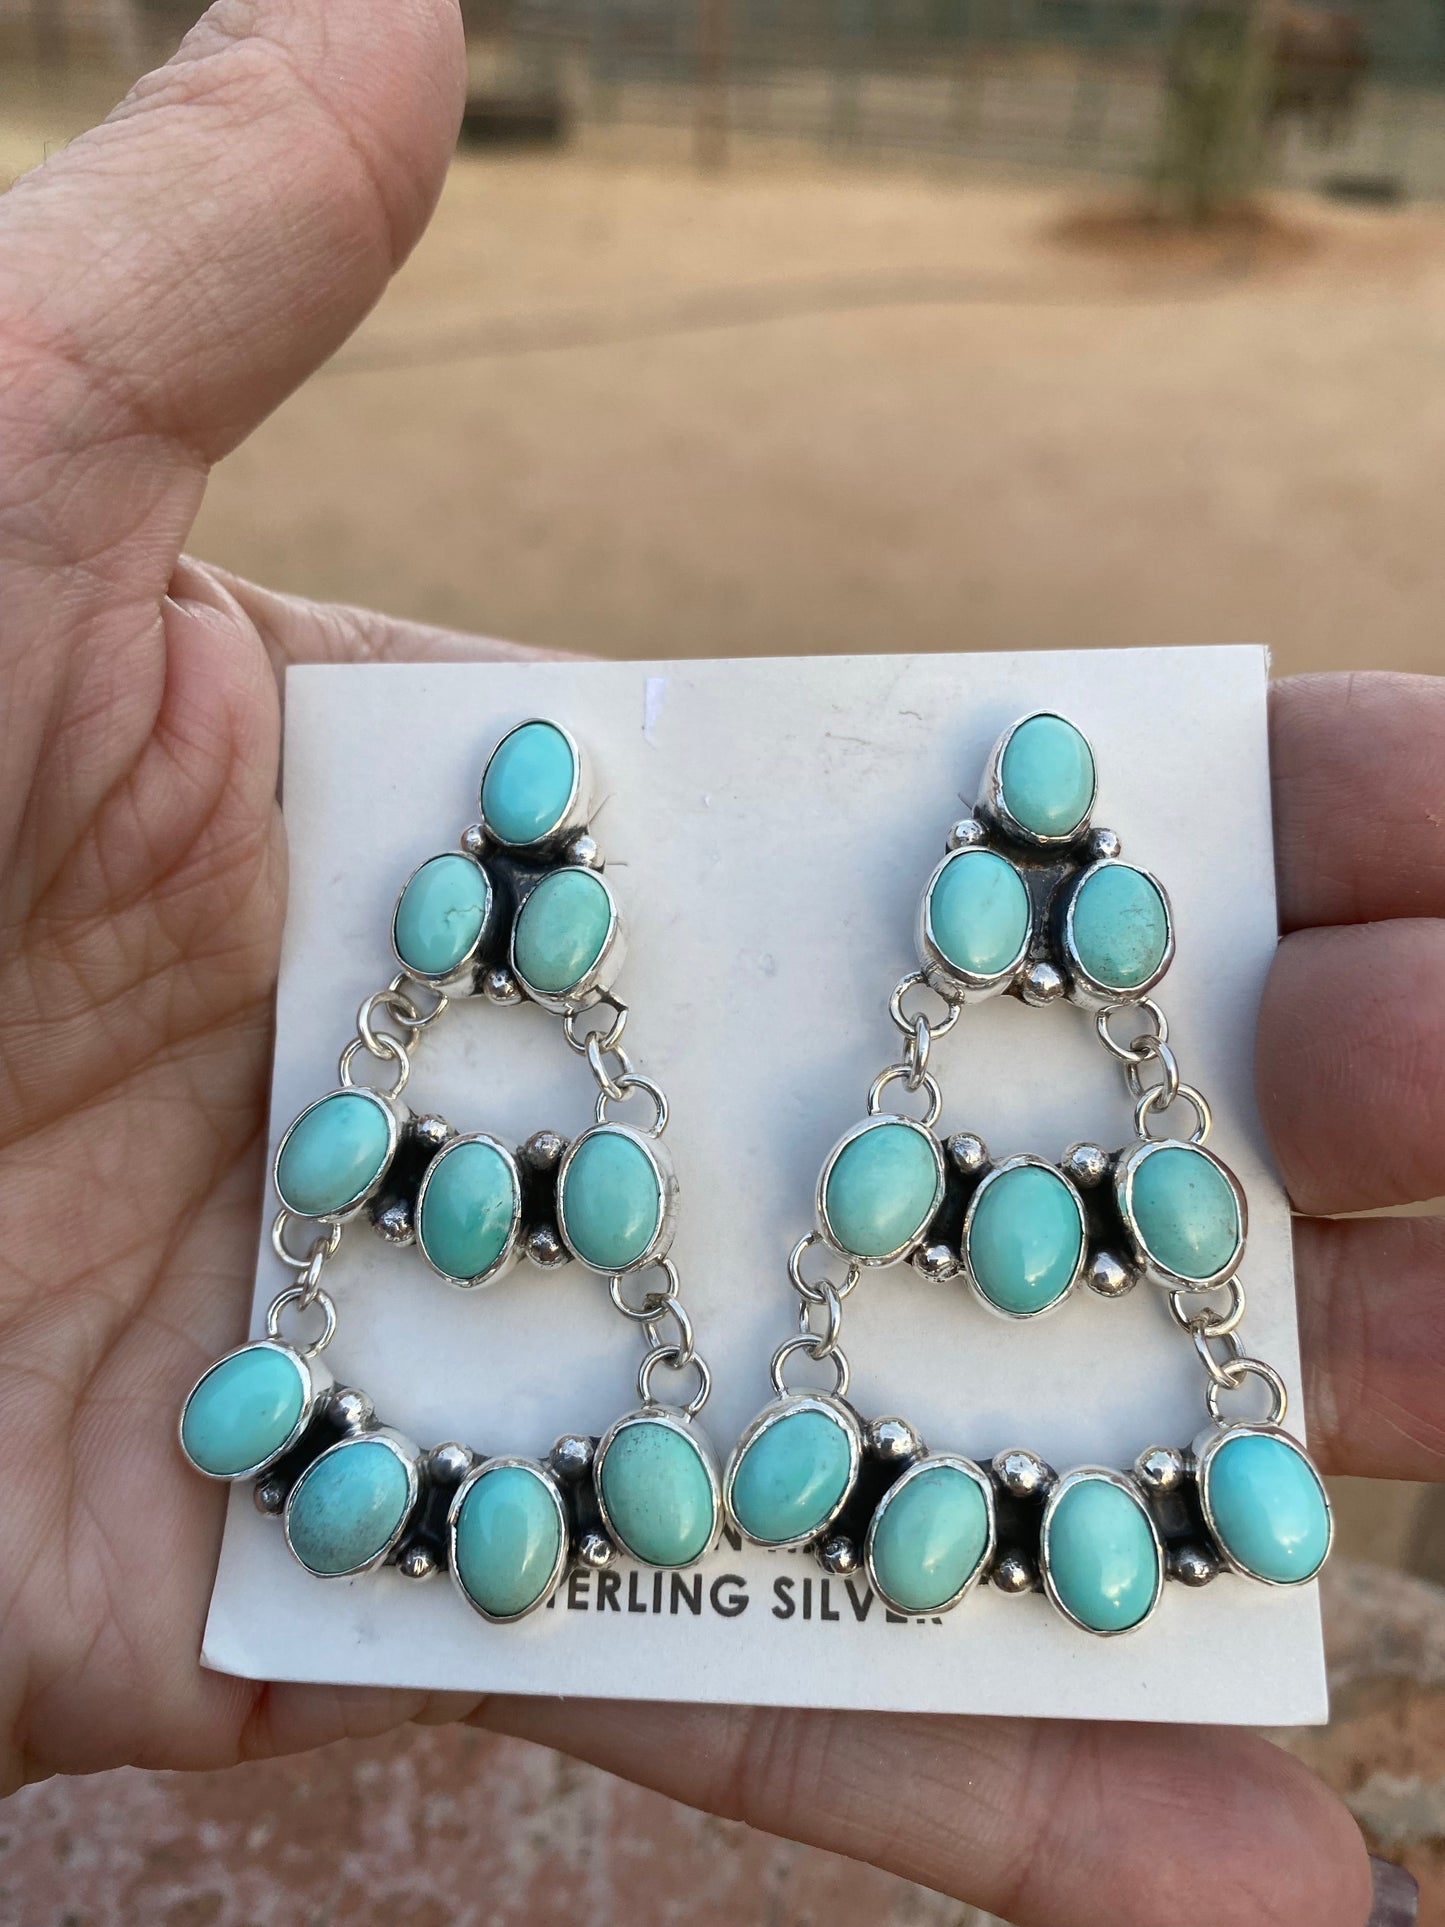 Navajo Carico Lake Turquoise & Sterling Silver Cluster Dangle Earrings Signed